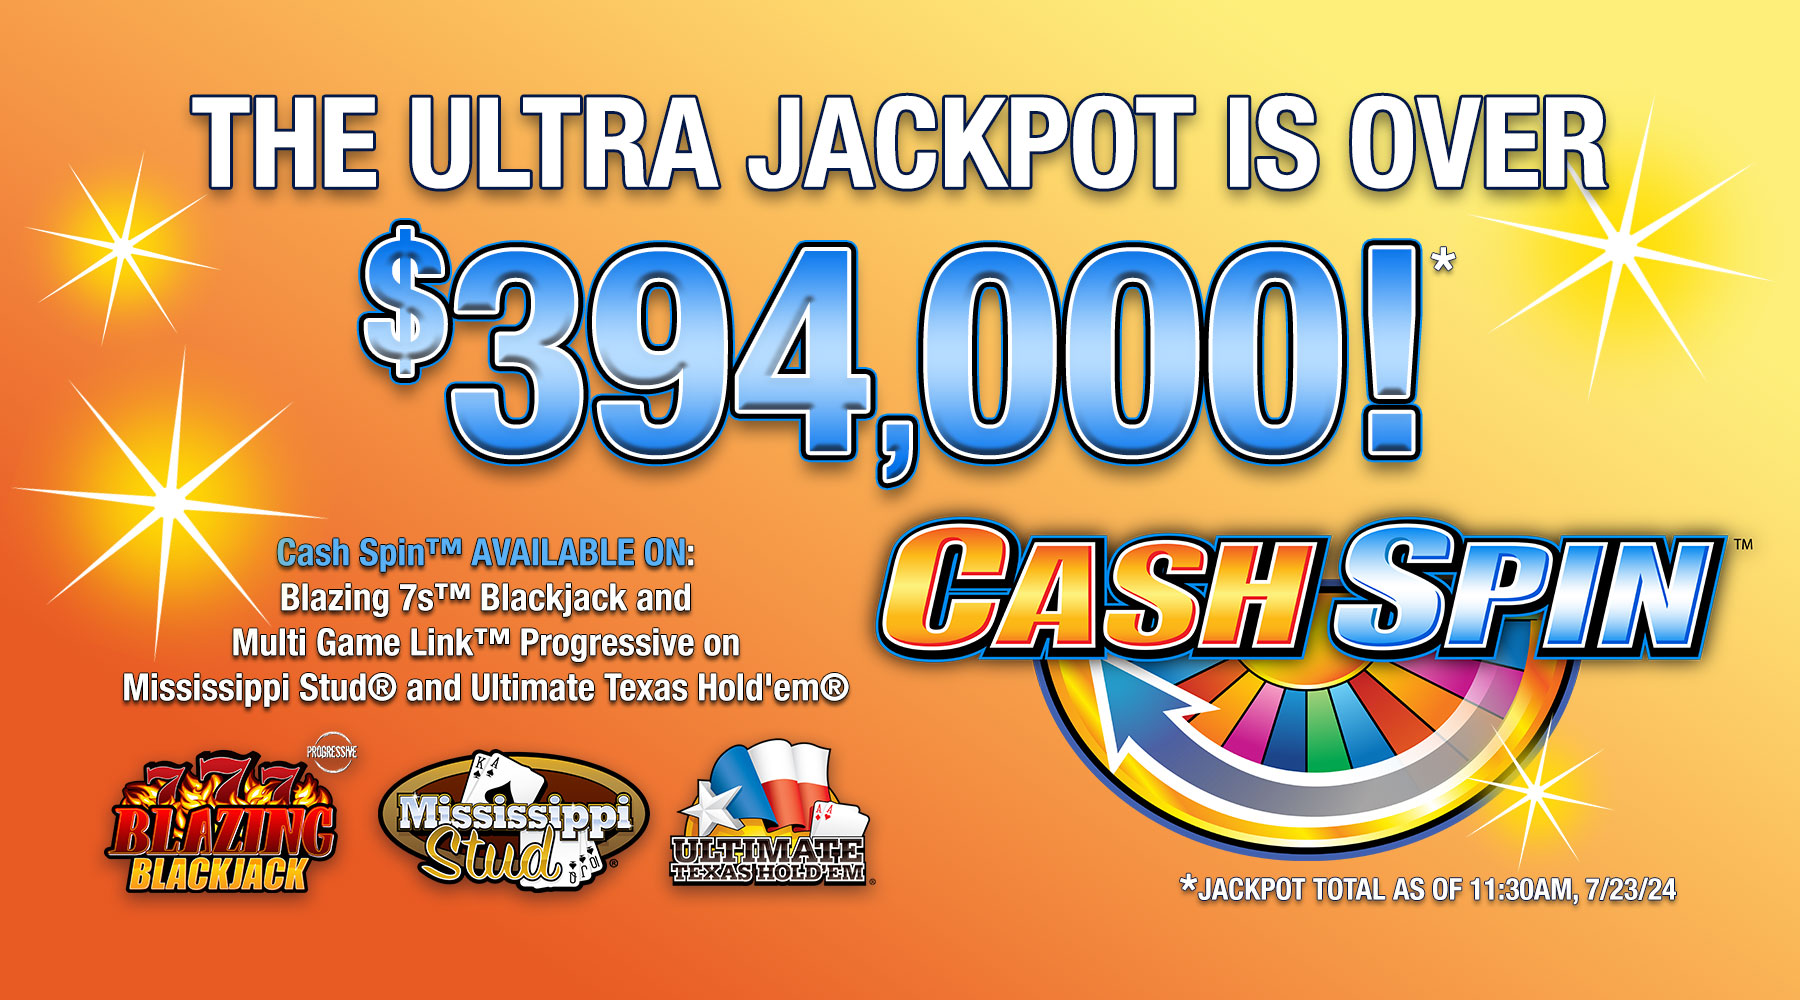 Cash Spin Ultra Jackpot as of 7/23/24